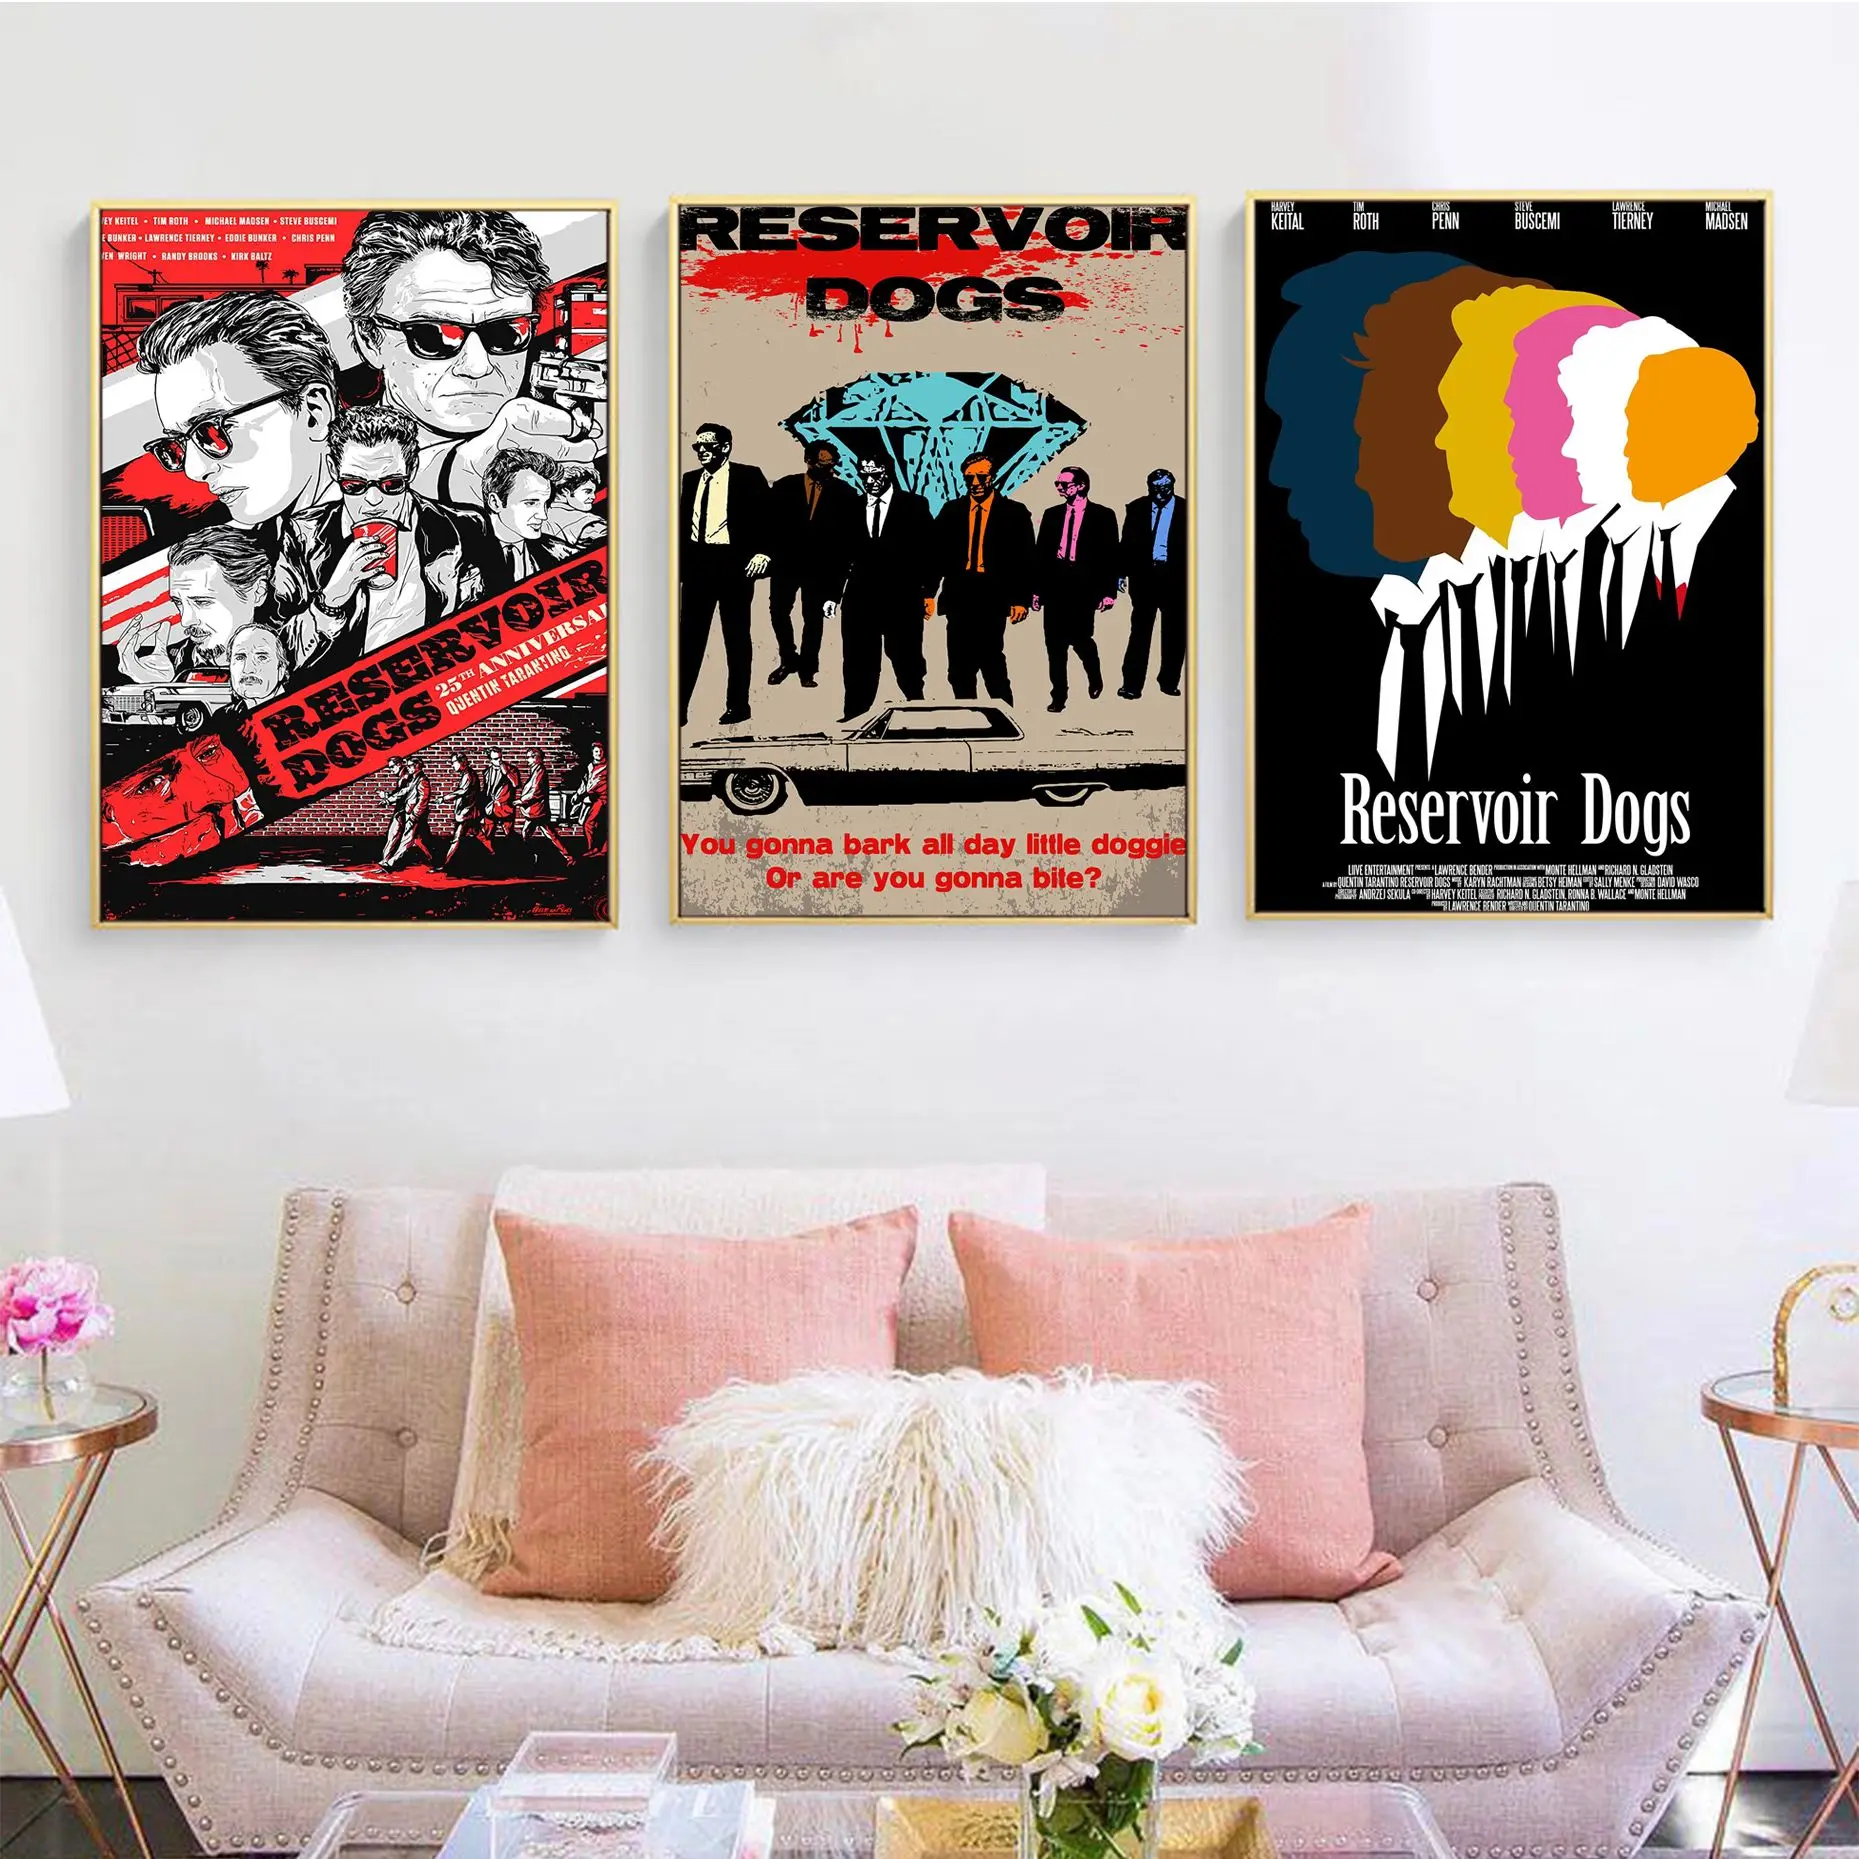 

Reservoir Dogs Movie Sticky Posters Whitepaper Prints Posters Artwork Stickers Wall Painting